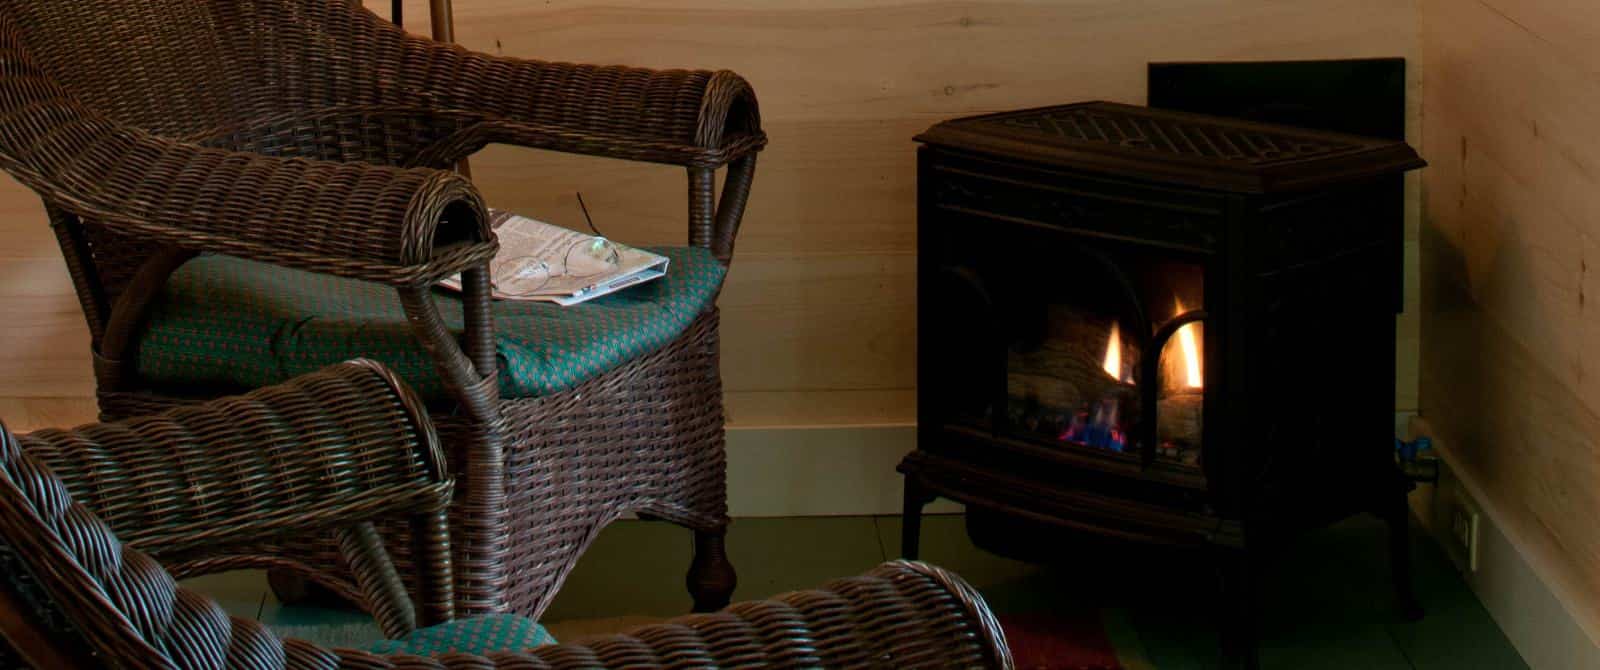 Two wicker armchairs with green padded seats surround a glowing black-iron wood stove.